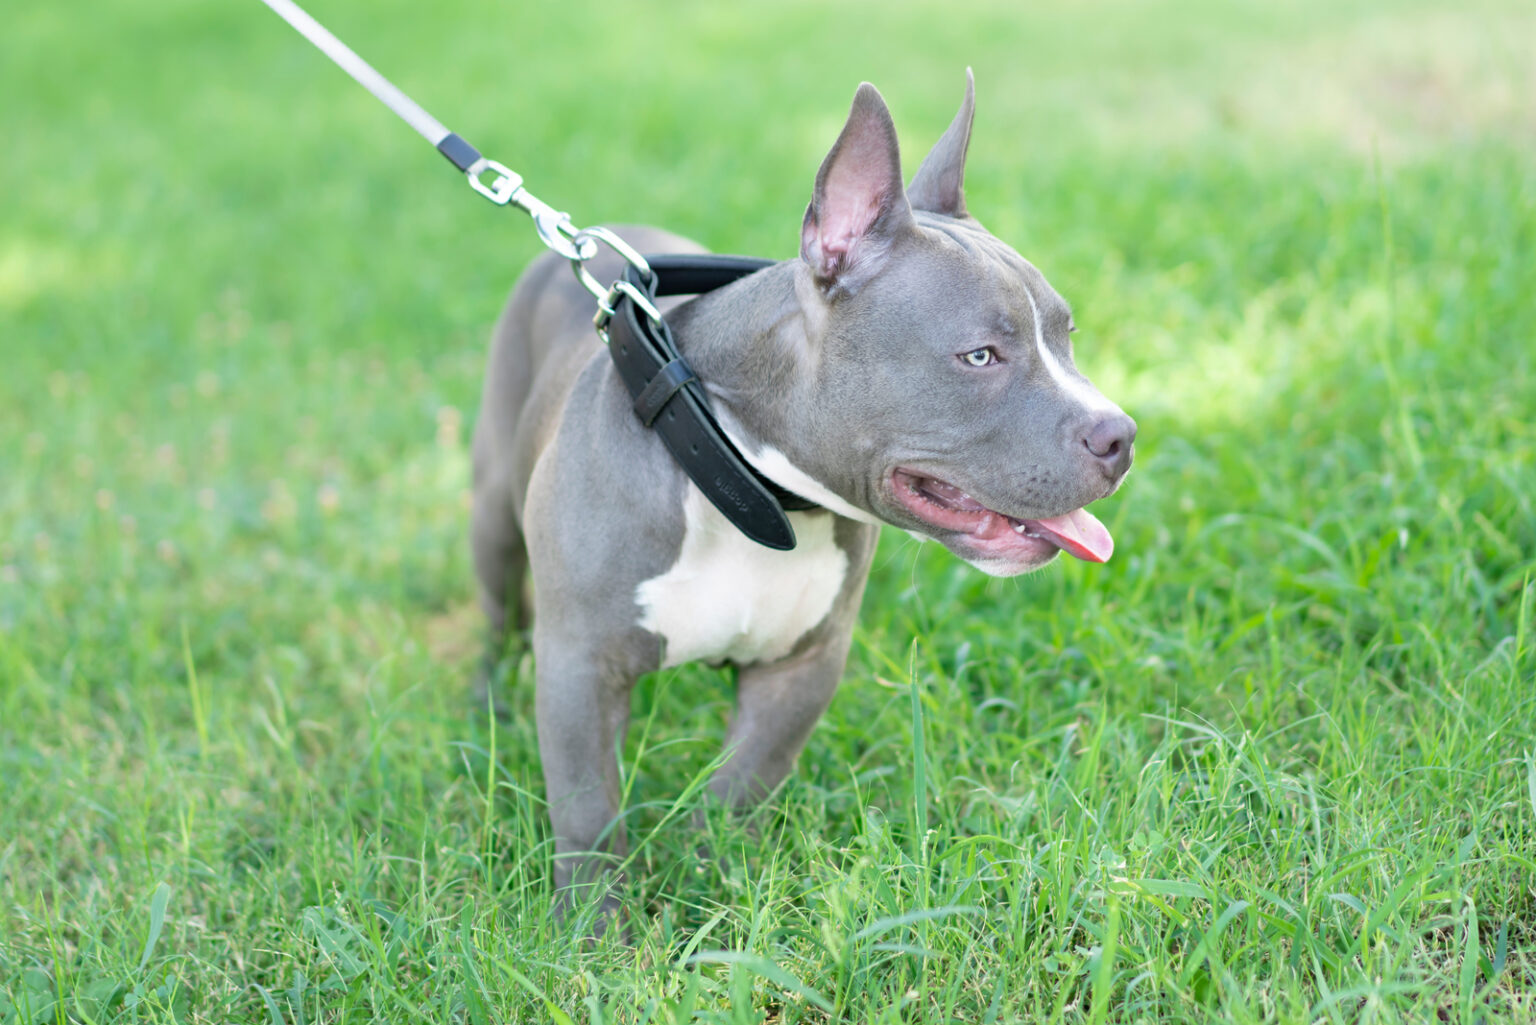 Blue American Bully All The Breed Information You Need